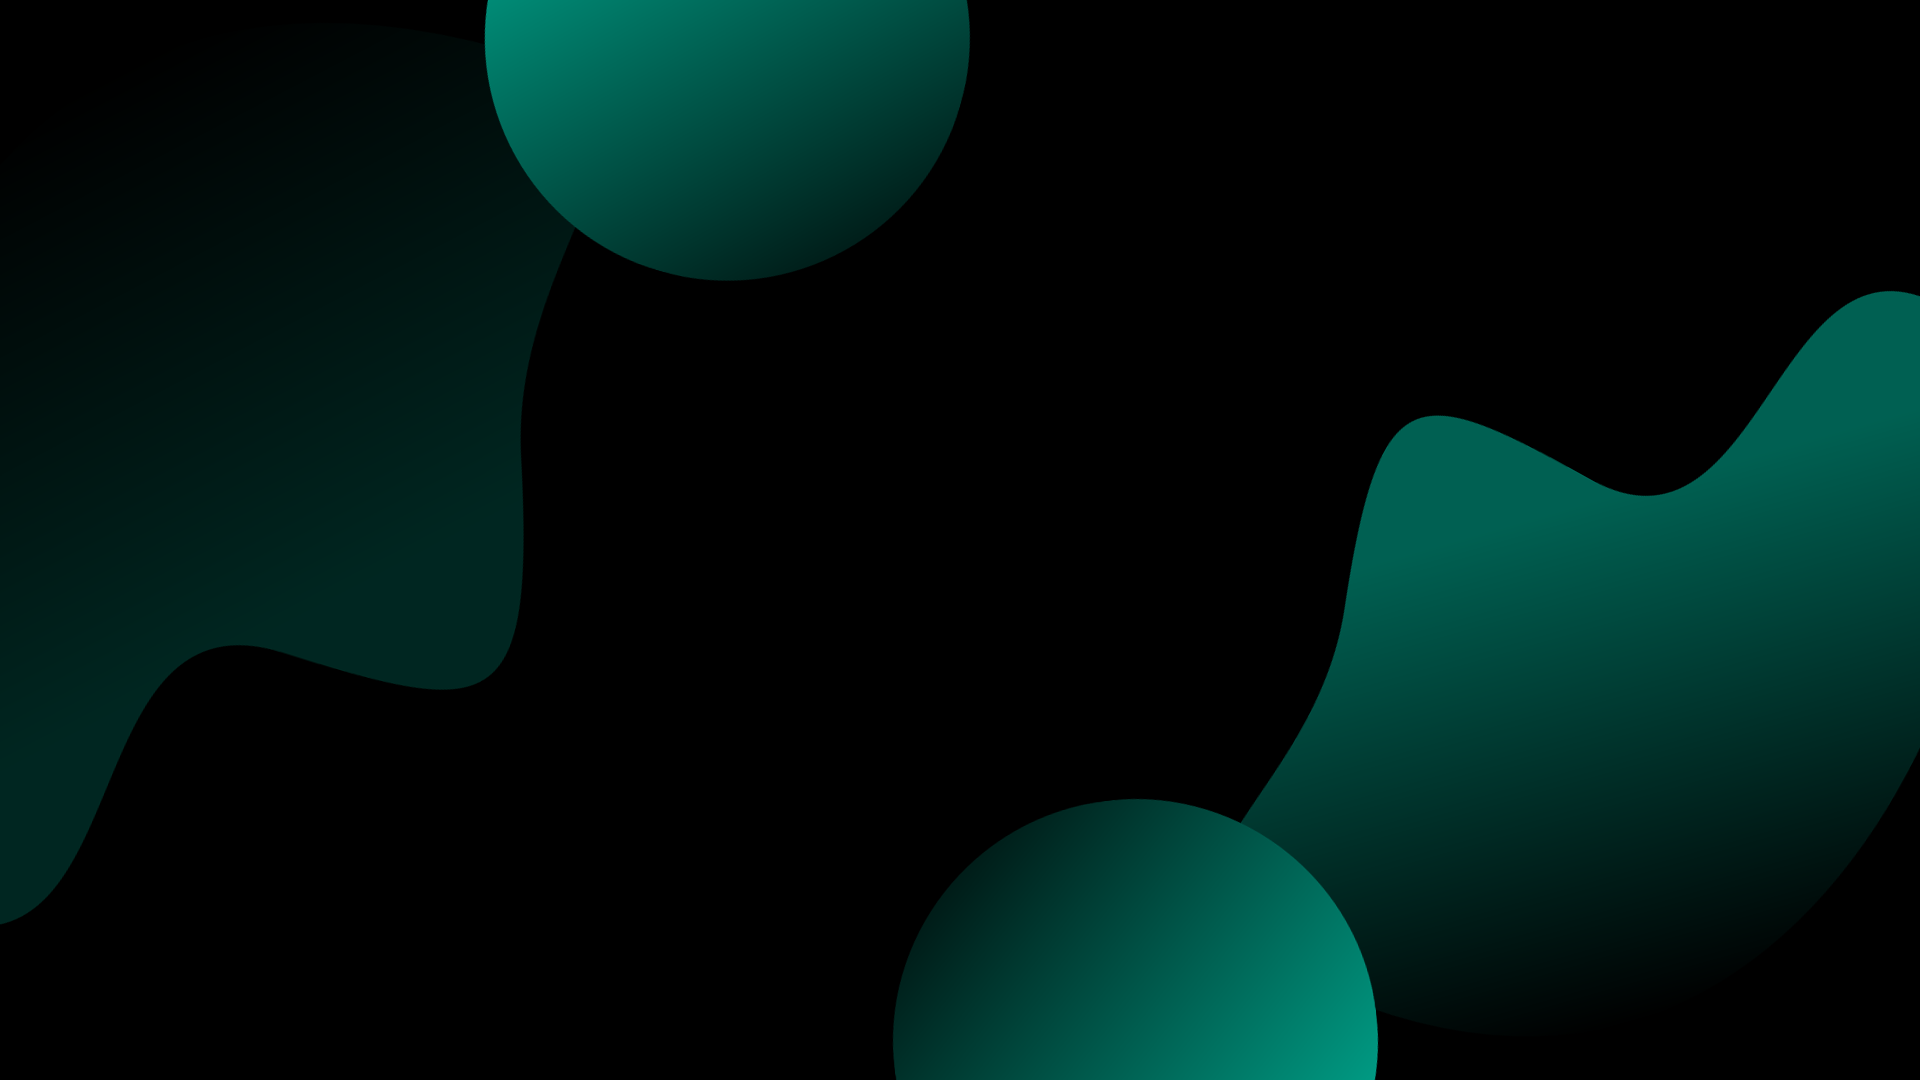 General 1920x1080 material minimal shapes green simple background minimalism